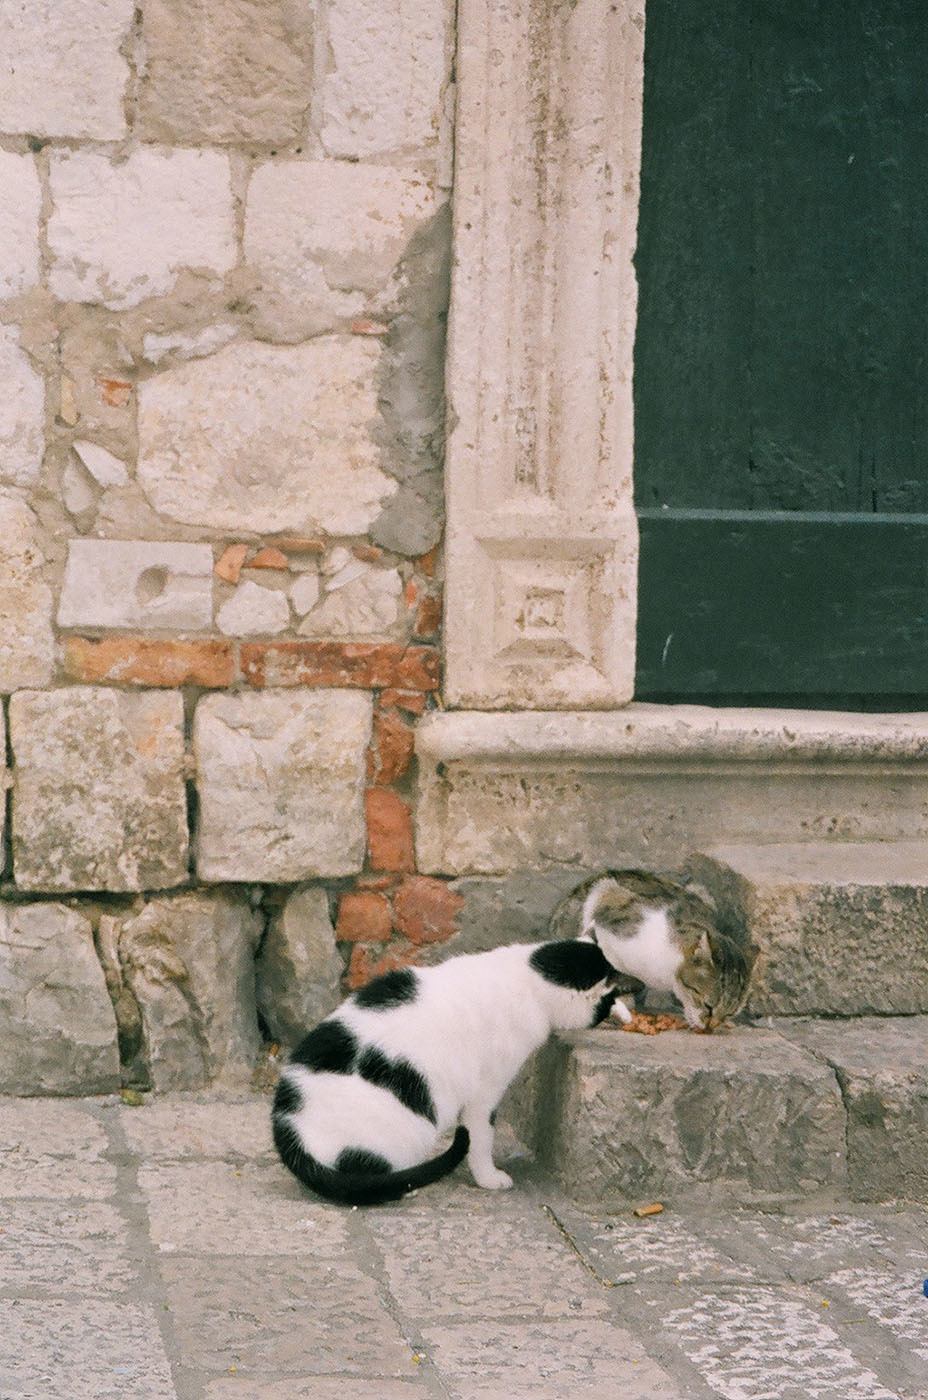 Cats outside a house in Dubrovnik Croatia